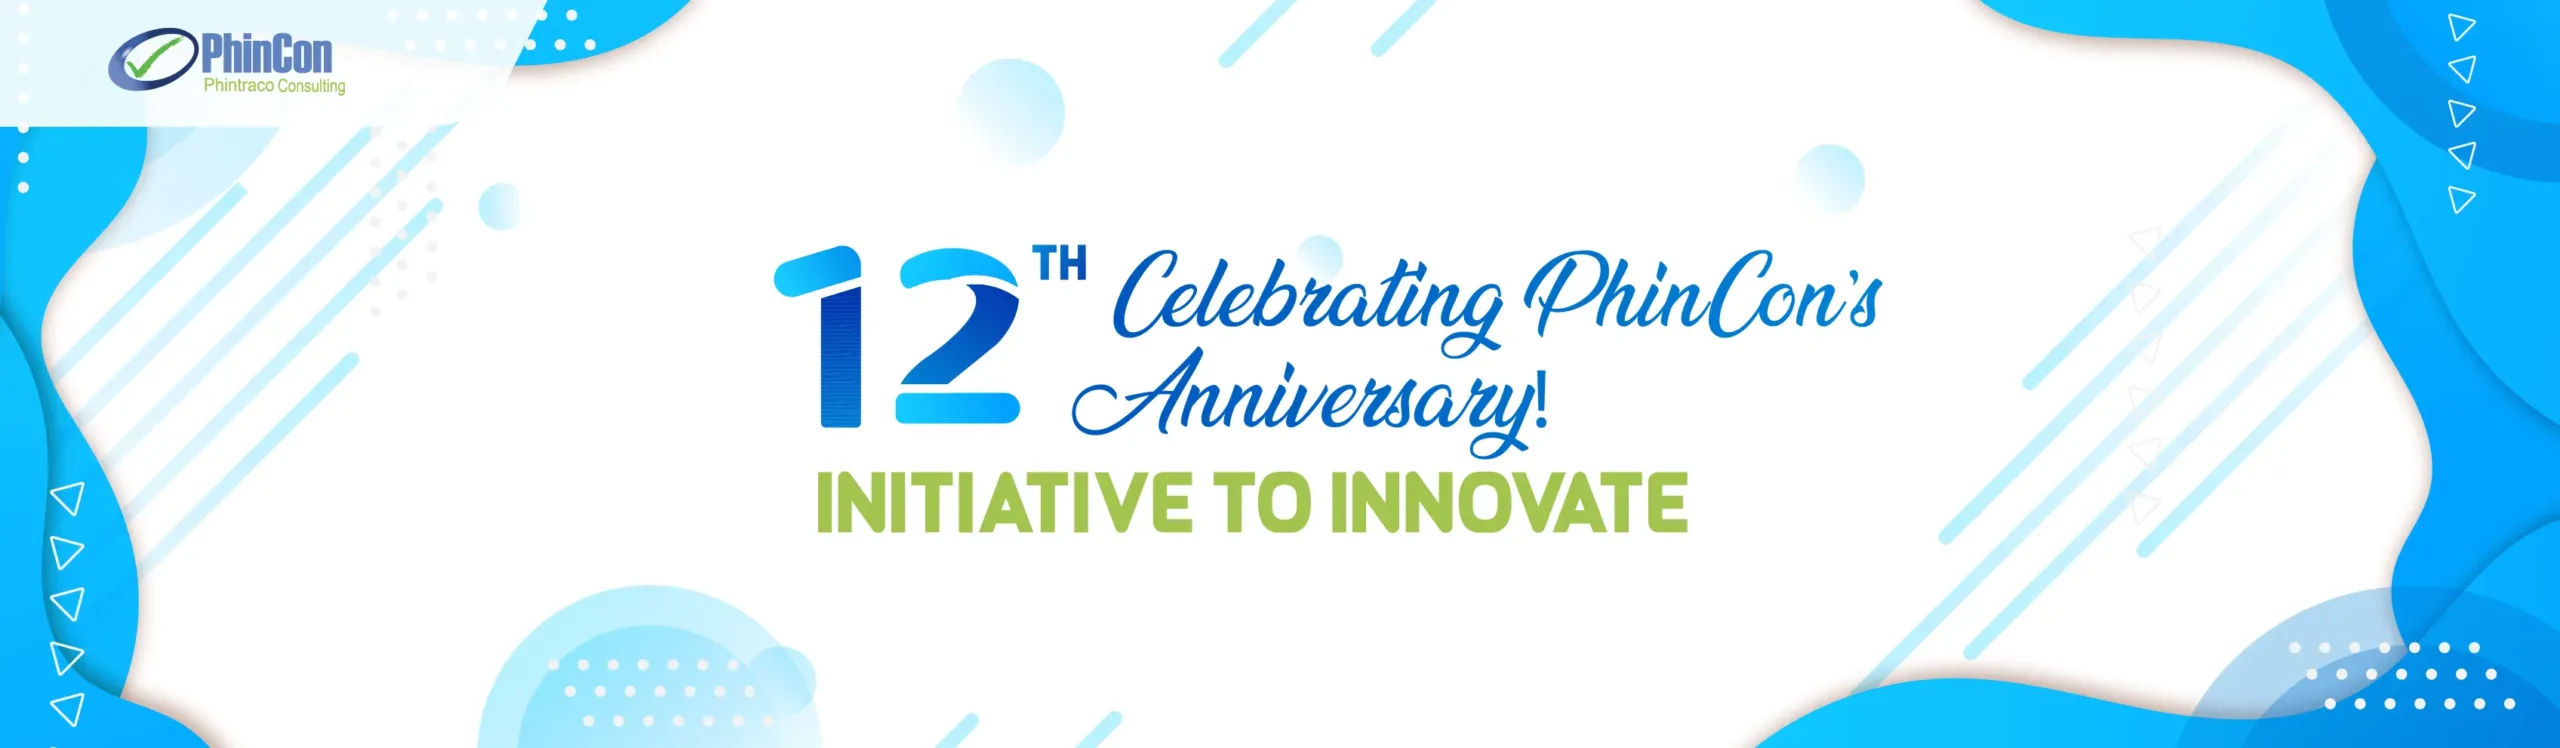 Celebrating 12th Anniversary, PhinCon Remains Consistent in Providing Its Best Solutions and Services